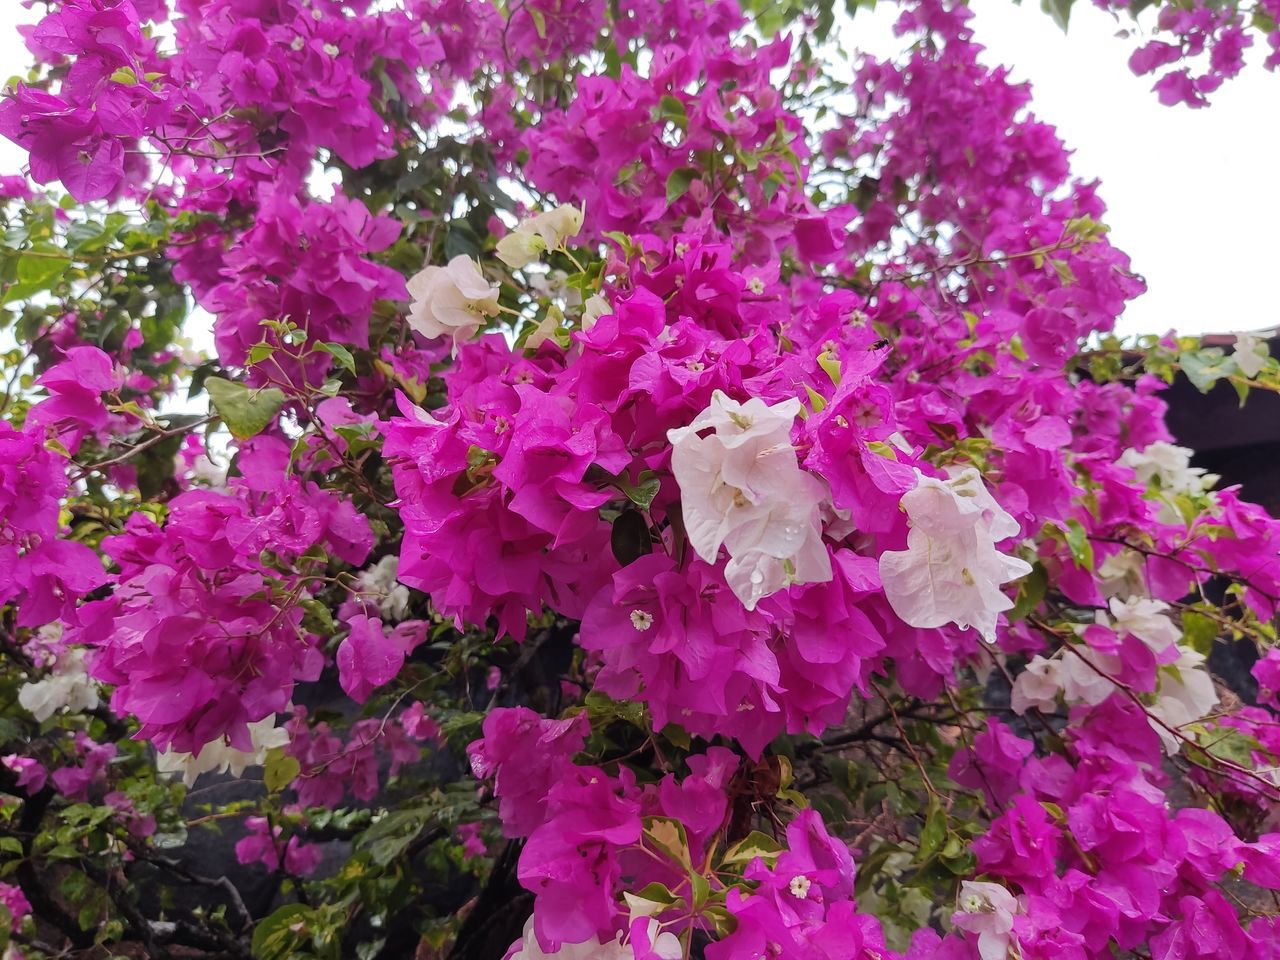 plant, flower, flowering plant, beauty in nature, freshness, growth, pink, fragility, nature, day, petal, no people, shrub, close-up, bougainvillea, blossom, springtime, outdoors, flower head, inflorescence, botany, tree, lilac, purple